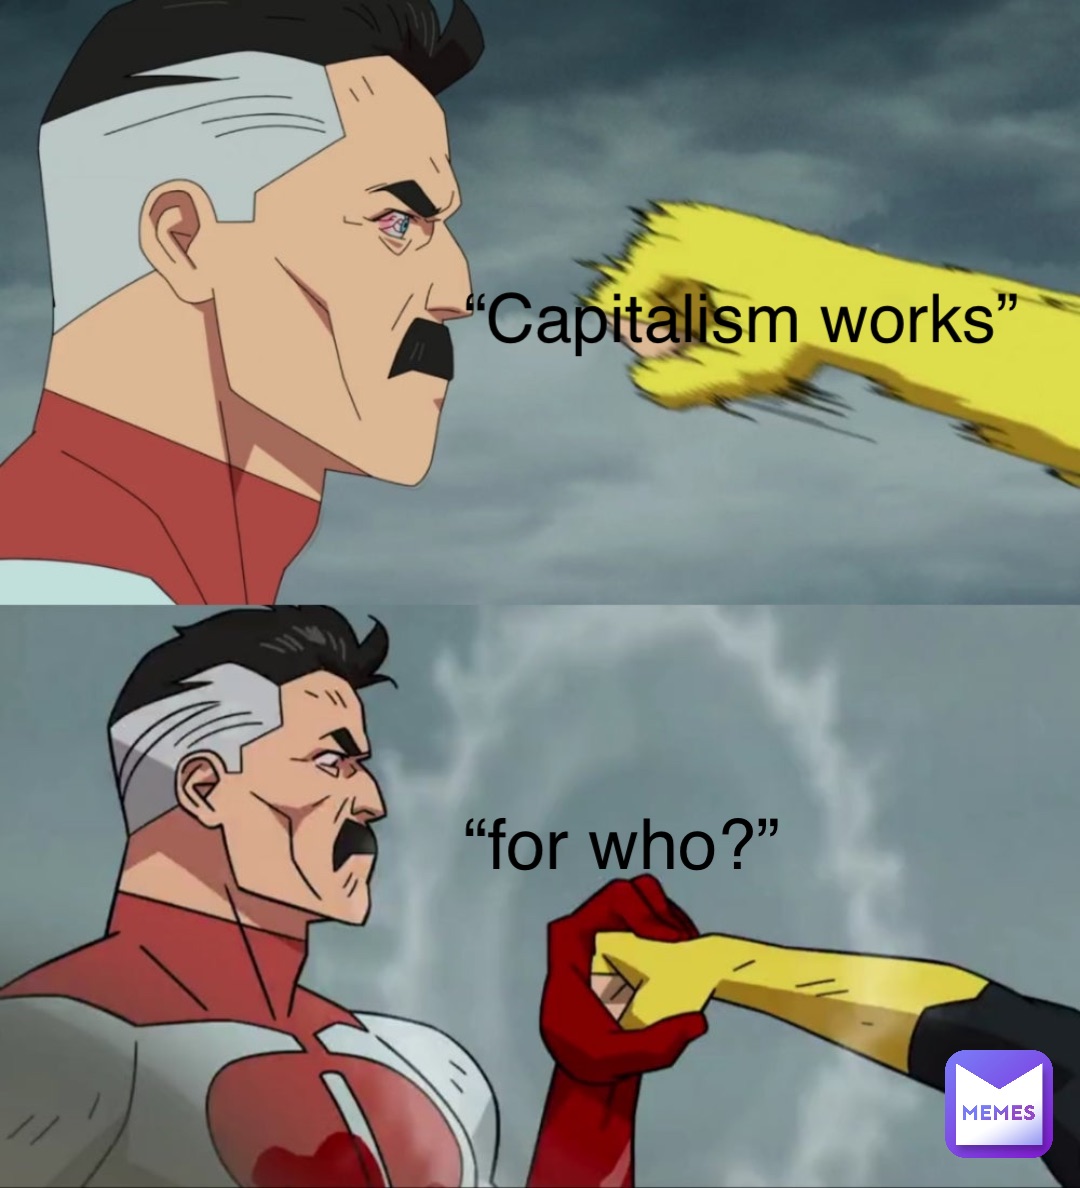 “Capitalism works” “for who?”